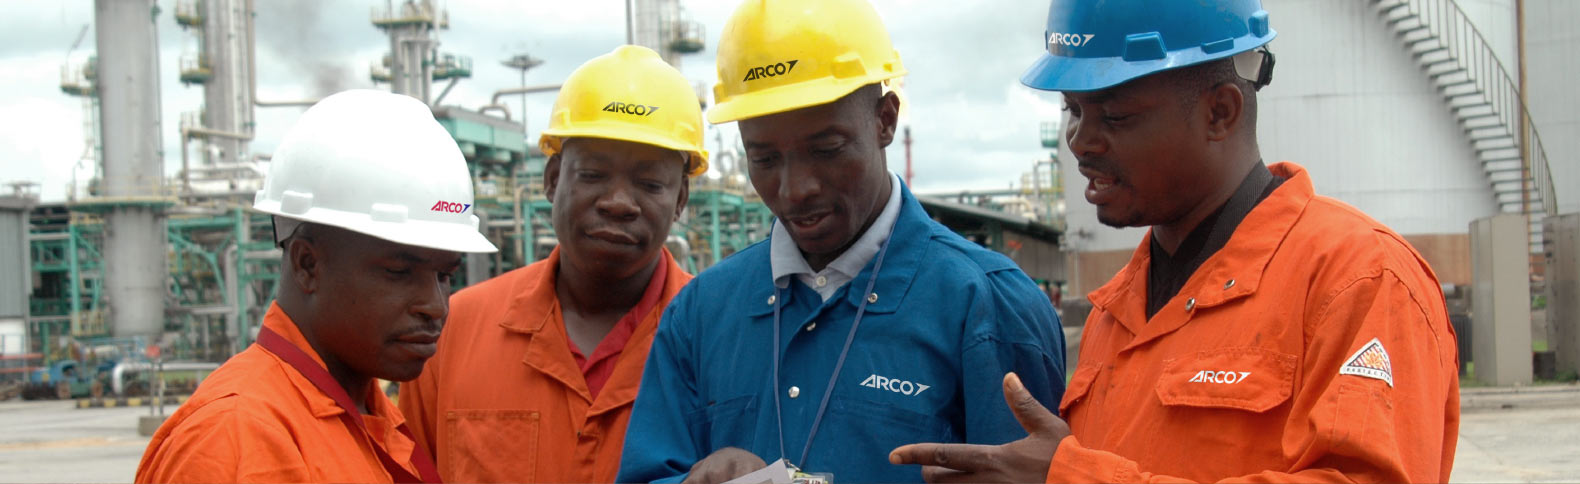 Arco Marine and Oilfield Services Limited Nigeria Graduate Opportunities